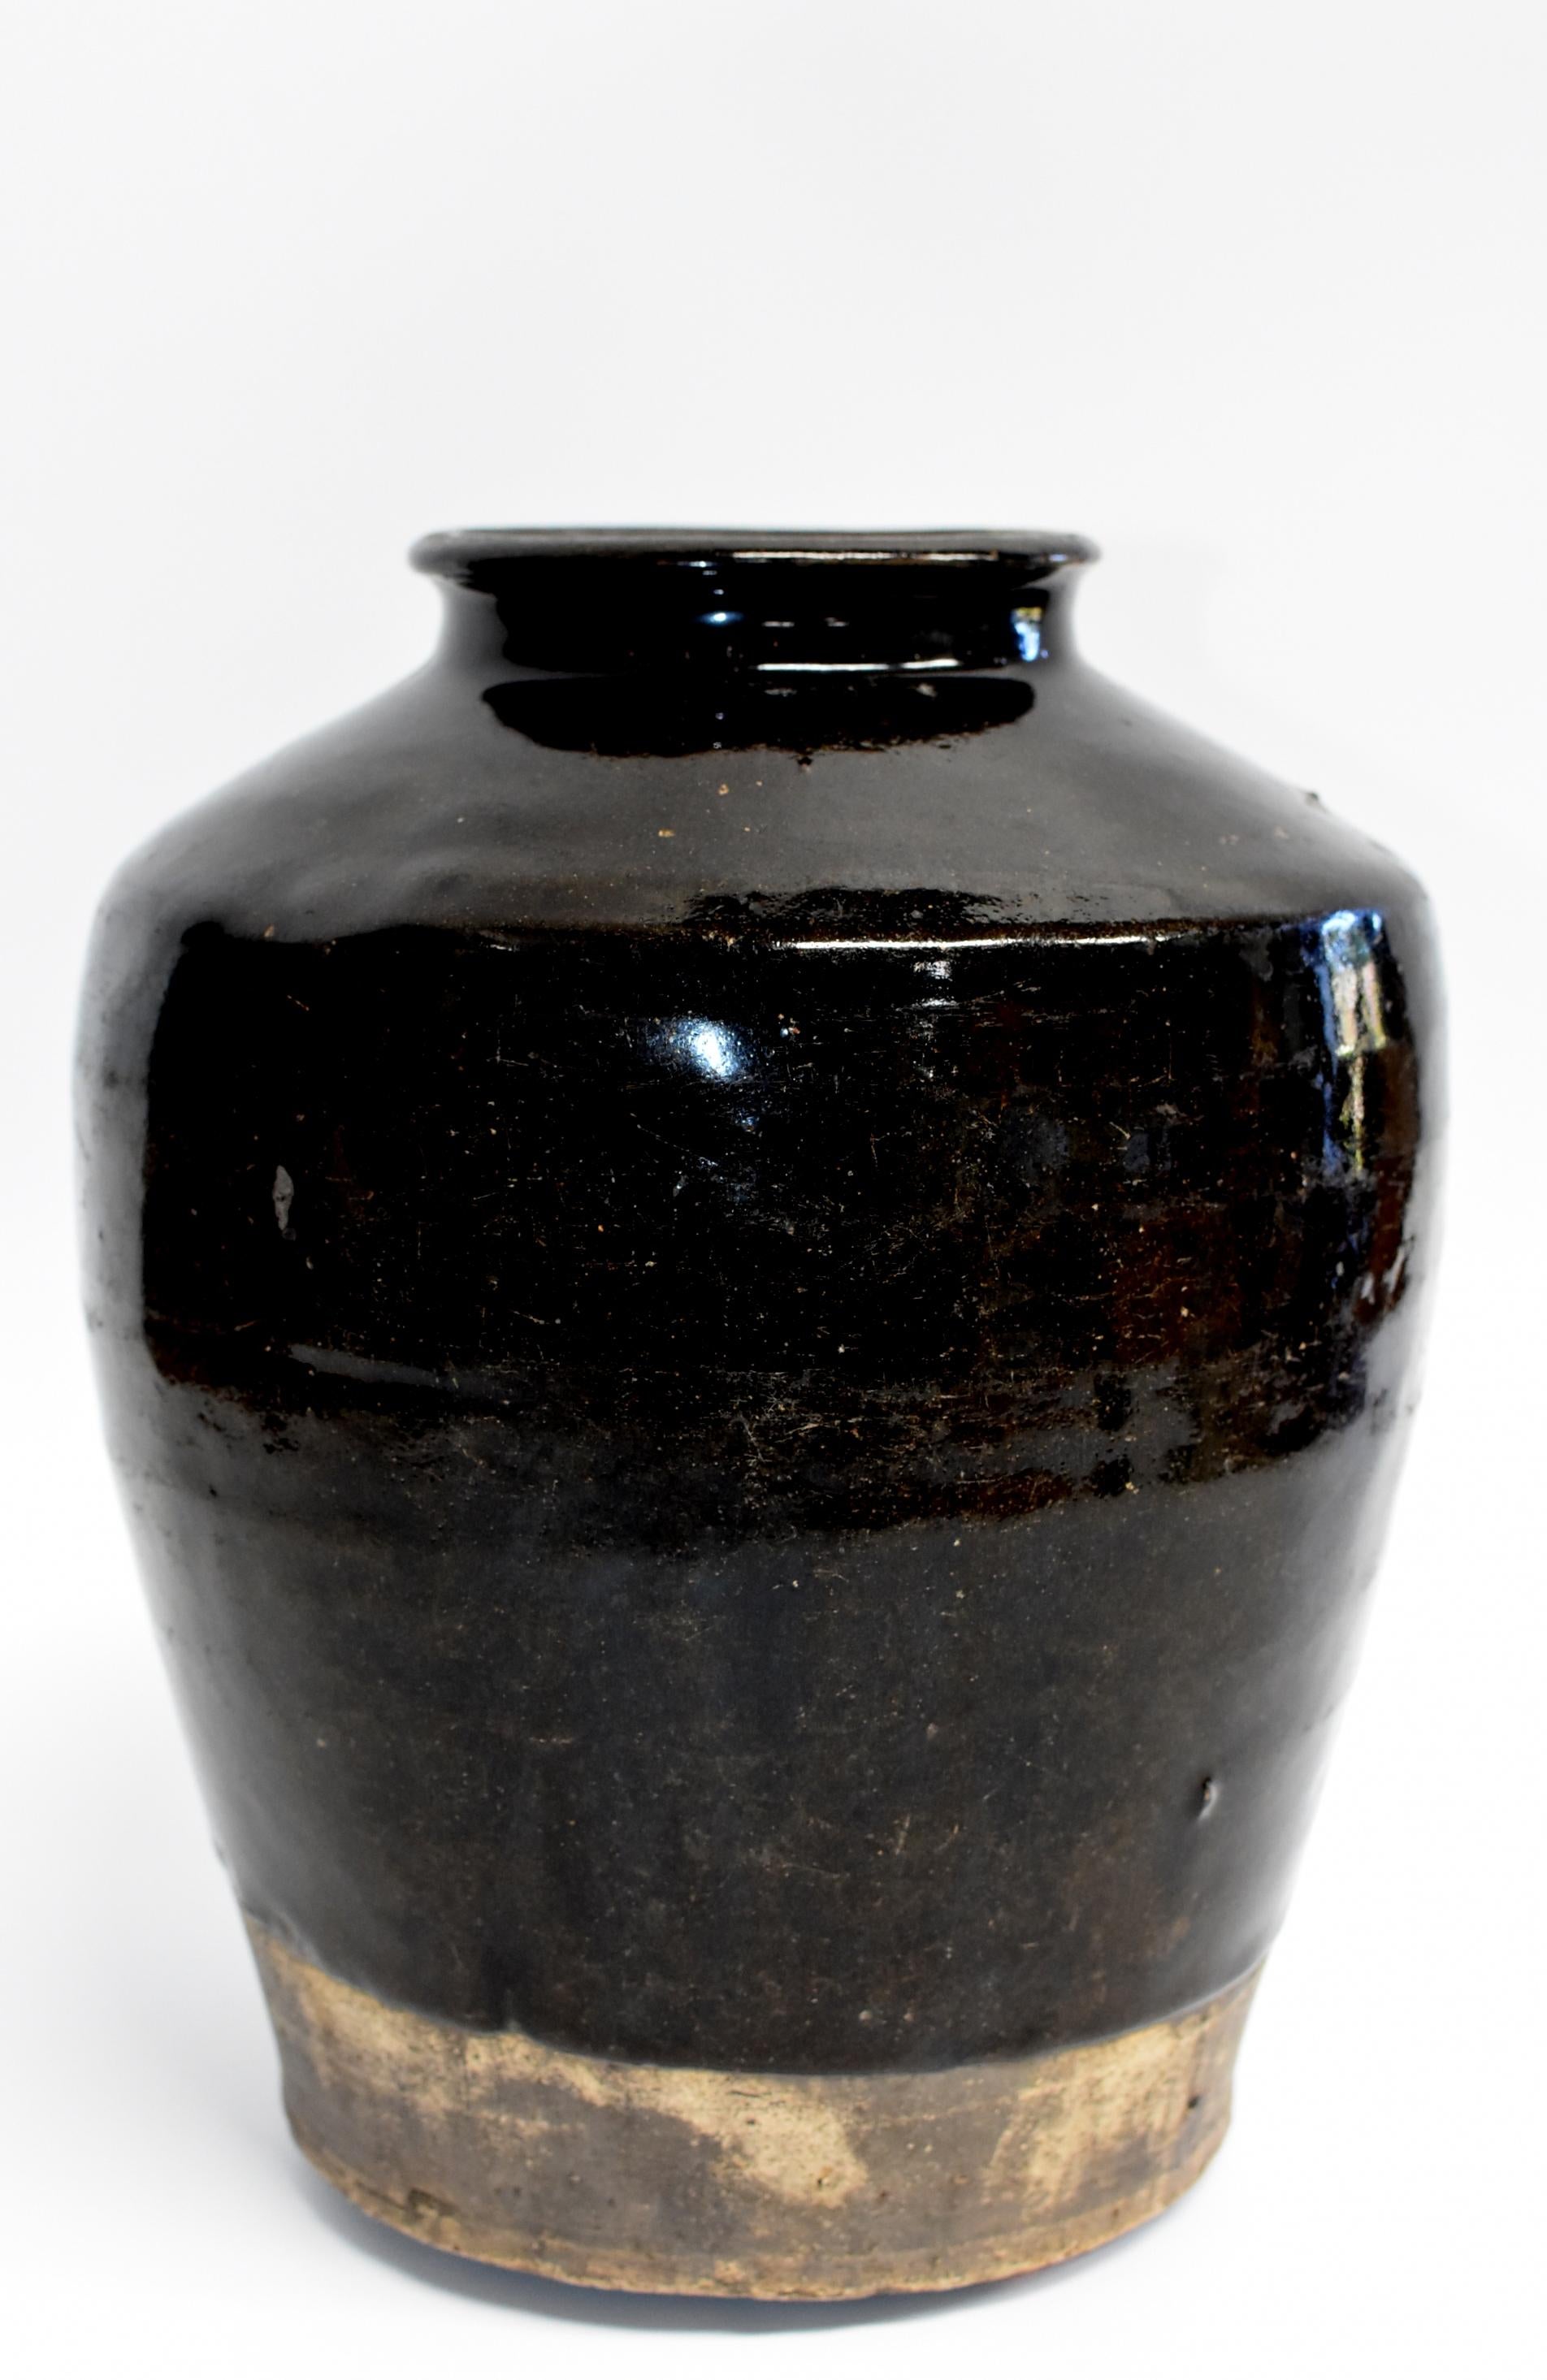 This wonderful piece is from Shanxi province, an ancient state of China. The area is famous for producing rich, aromatic, dark vinegar. Historically these jars were used to store the prized liquids. Now, their rustic, artistic appeal with the